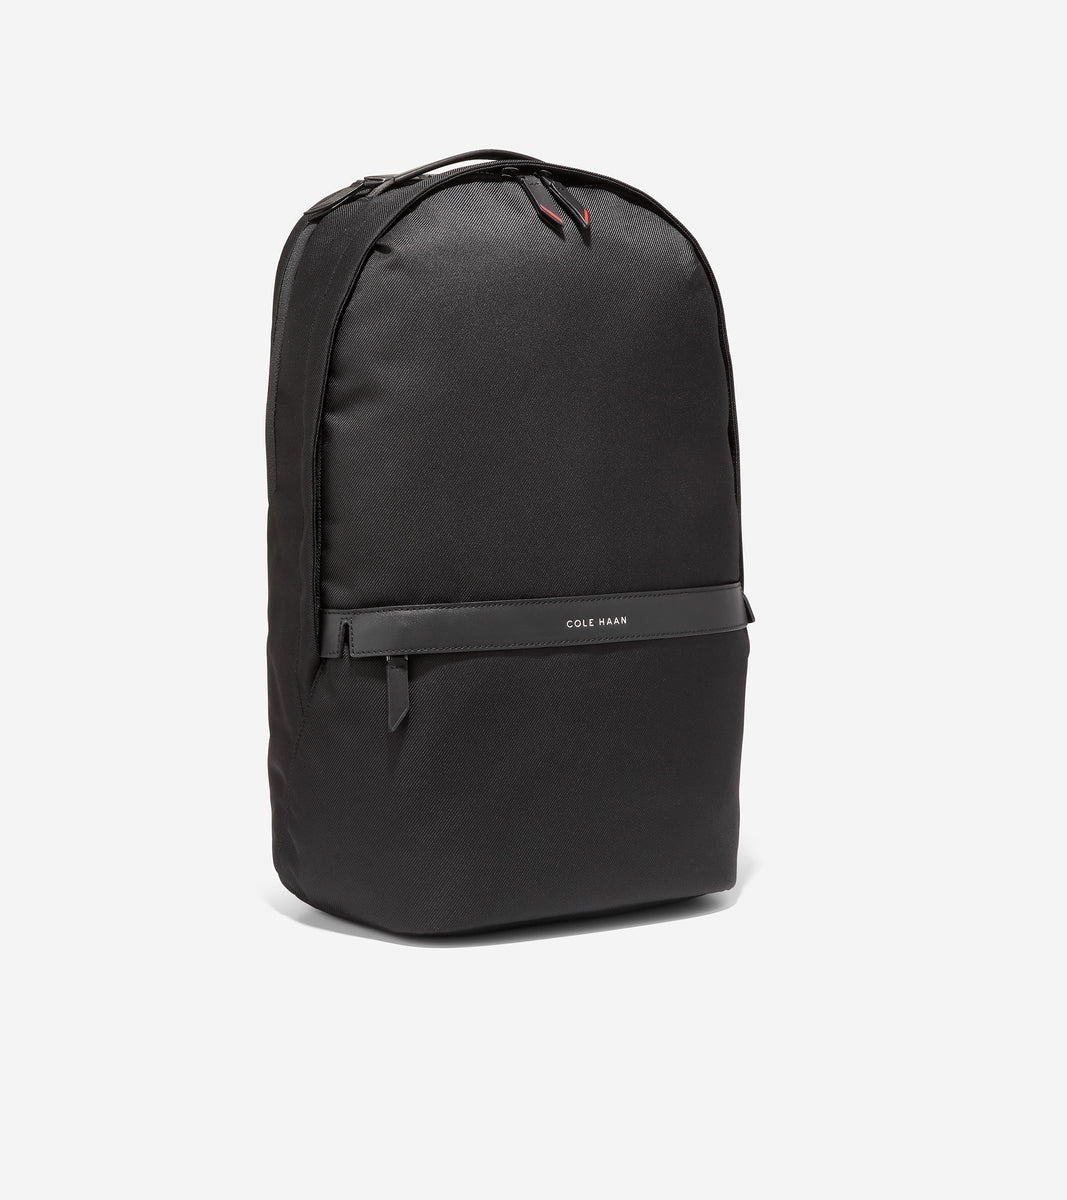 Go-To Backpack